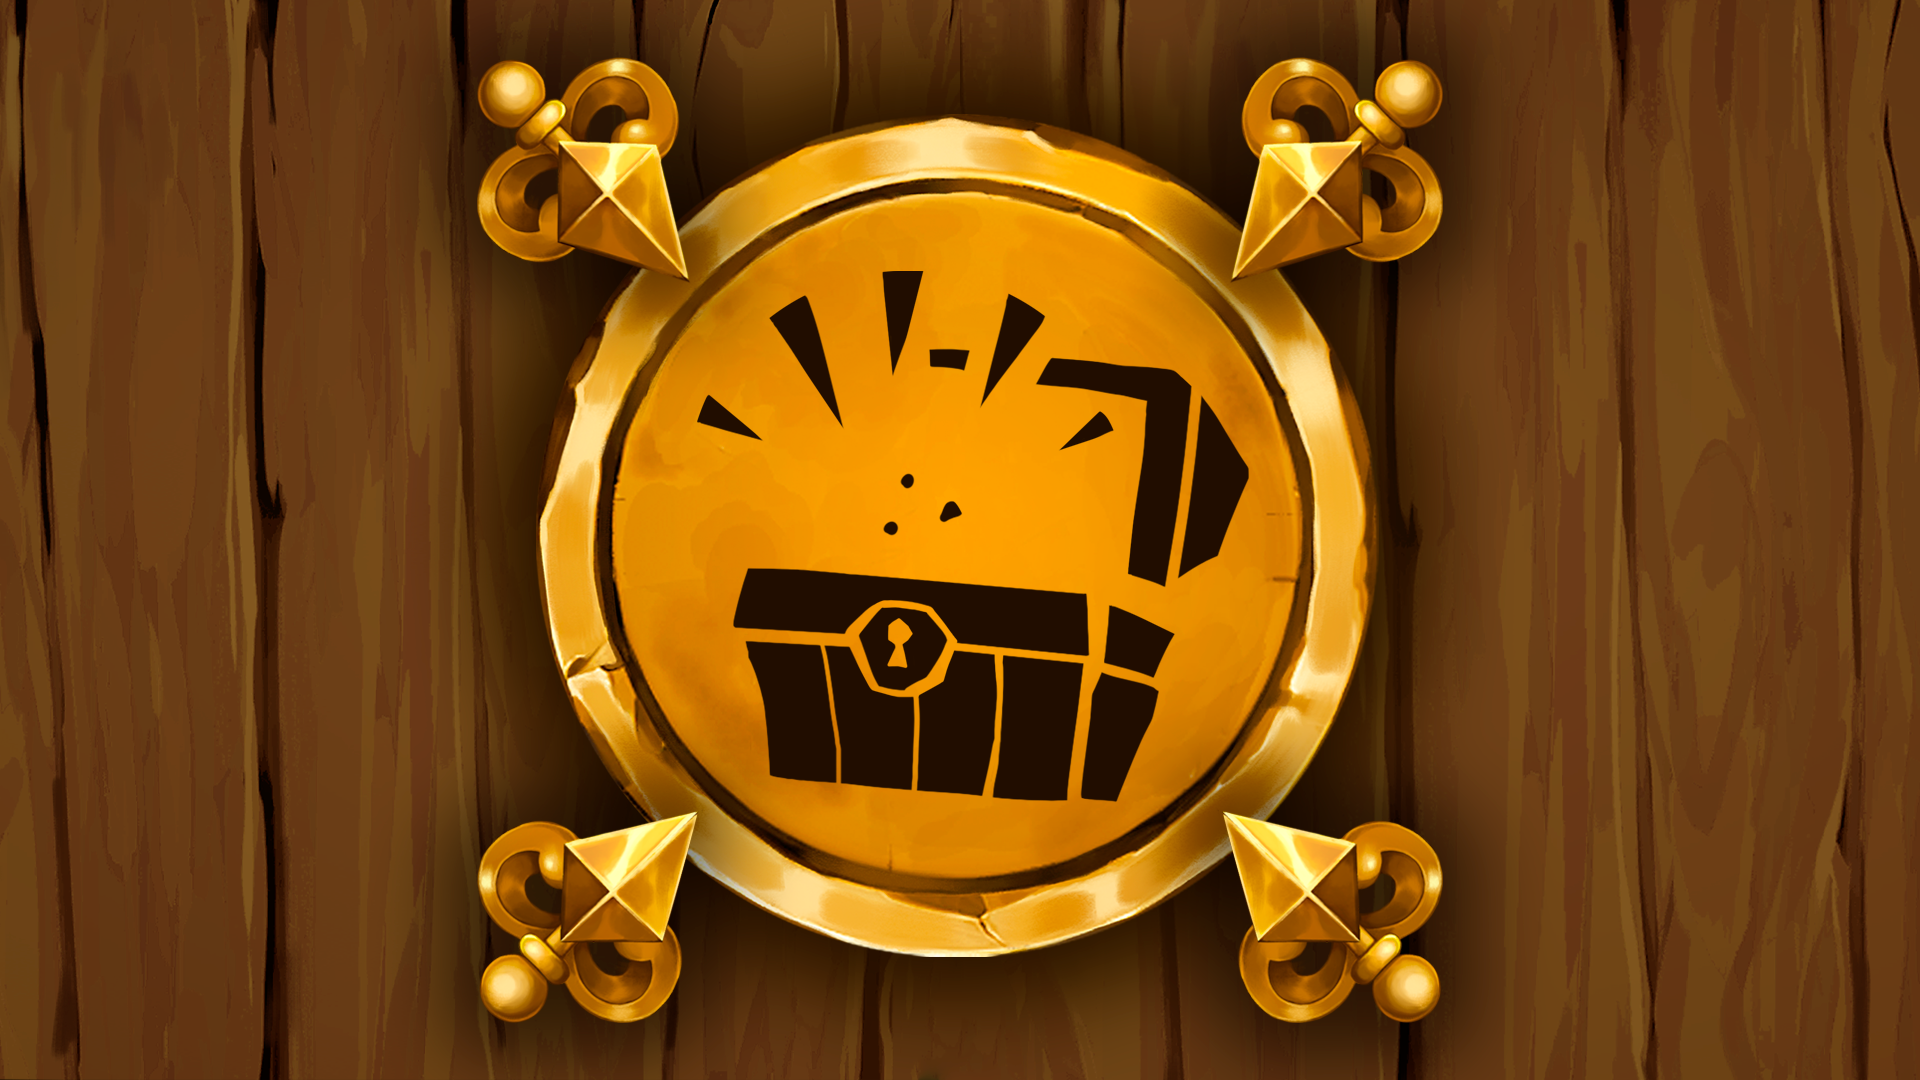 Icon for The collector